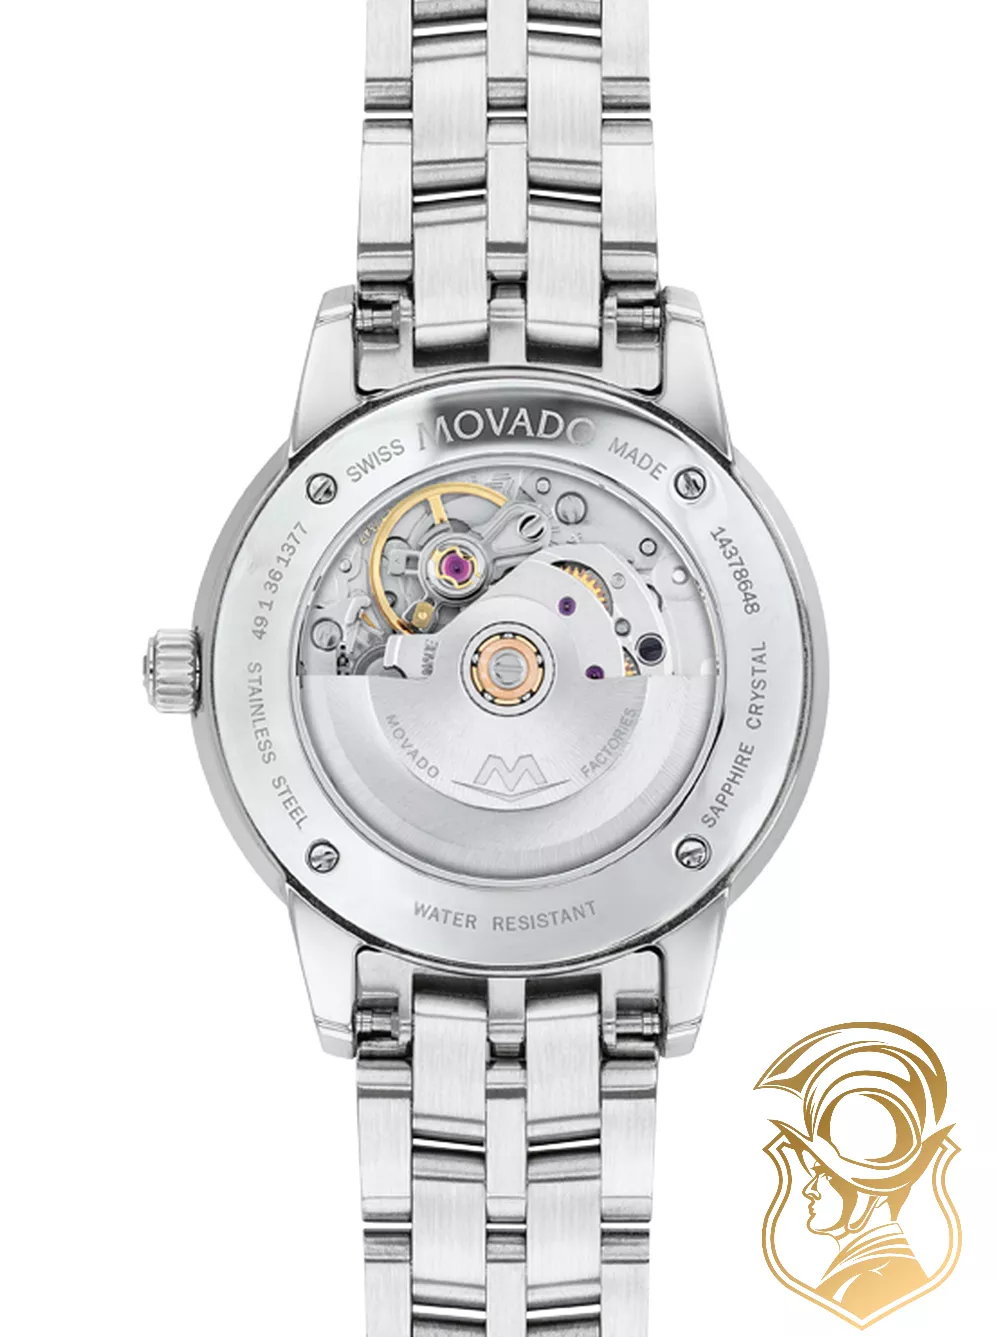 Movado 1881 Automatic Watch 30mm